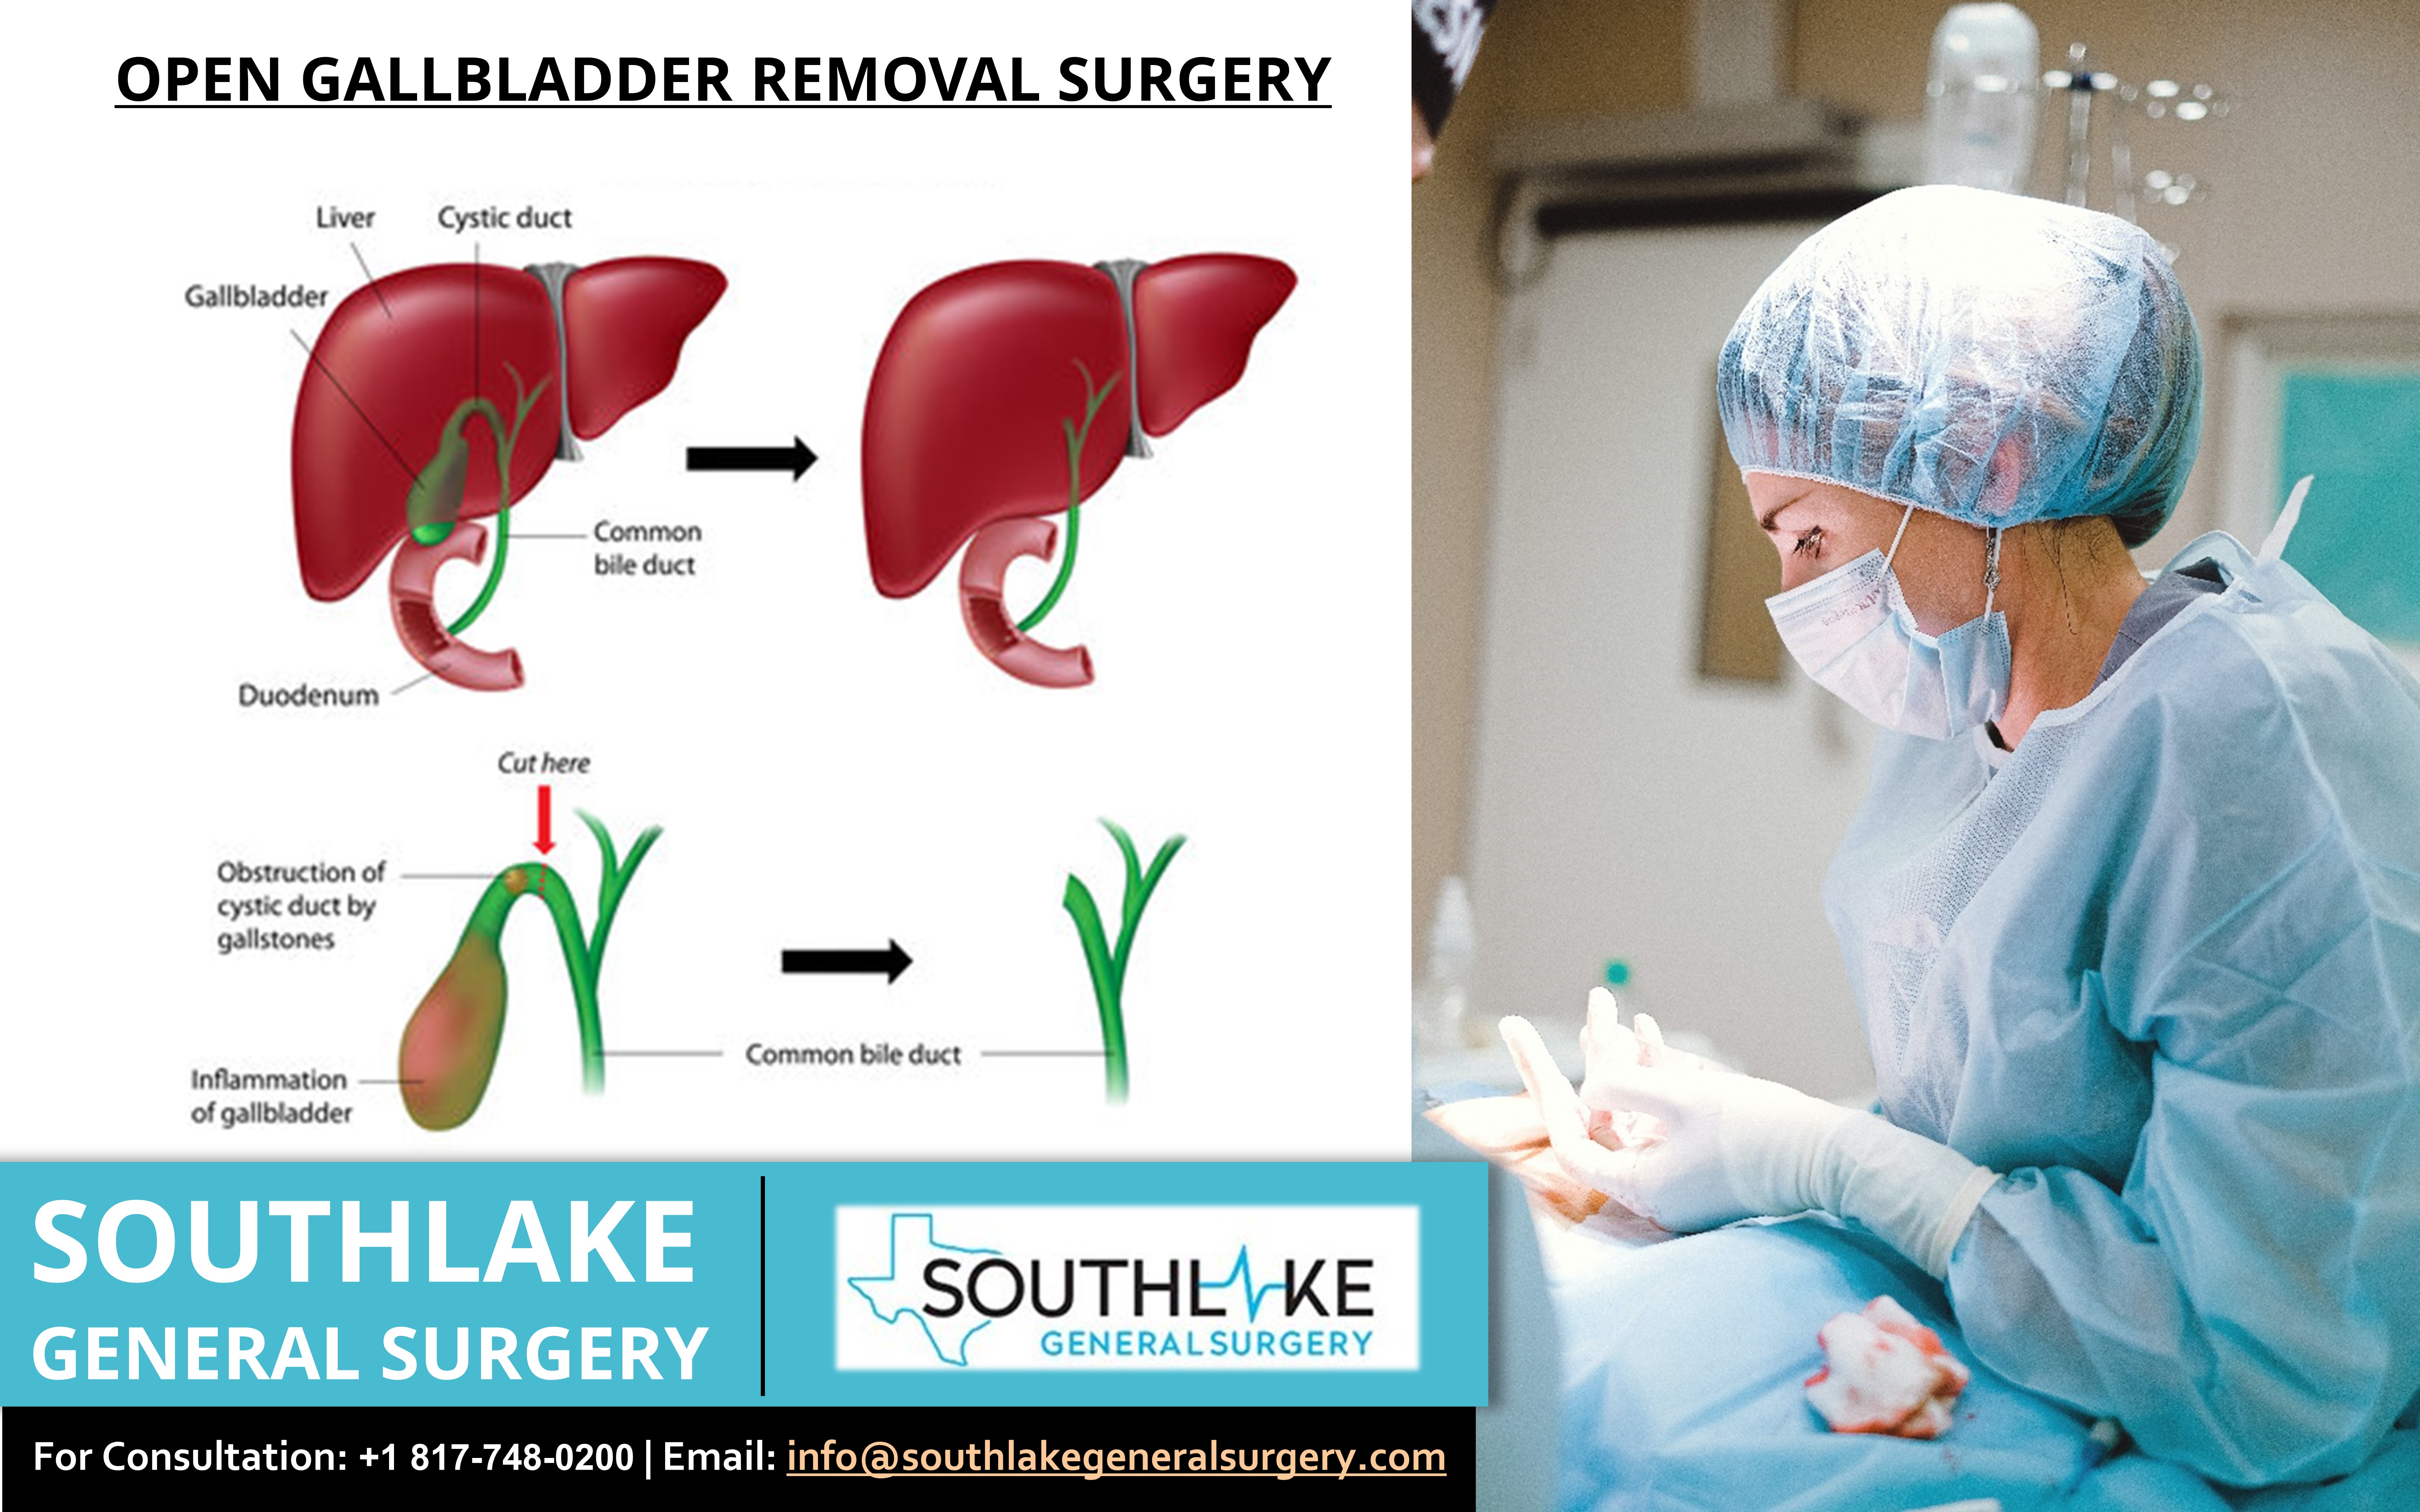 Open Gallbladder Removal Surgery at Southlake General Surgery, Texas